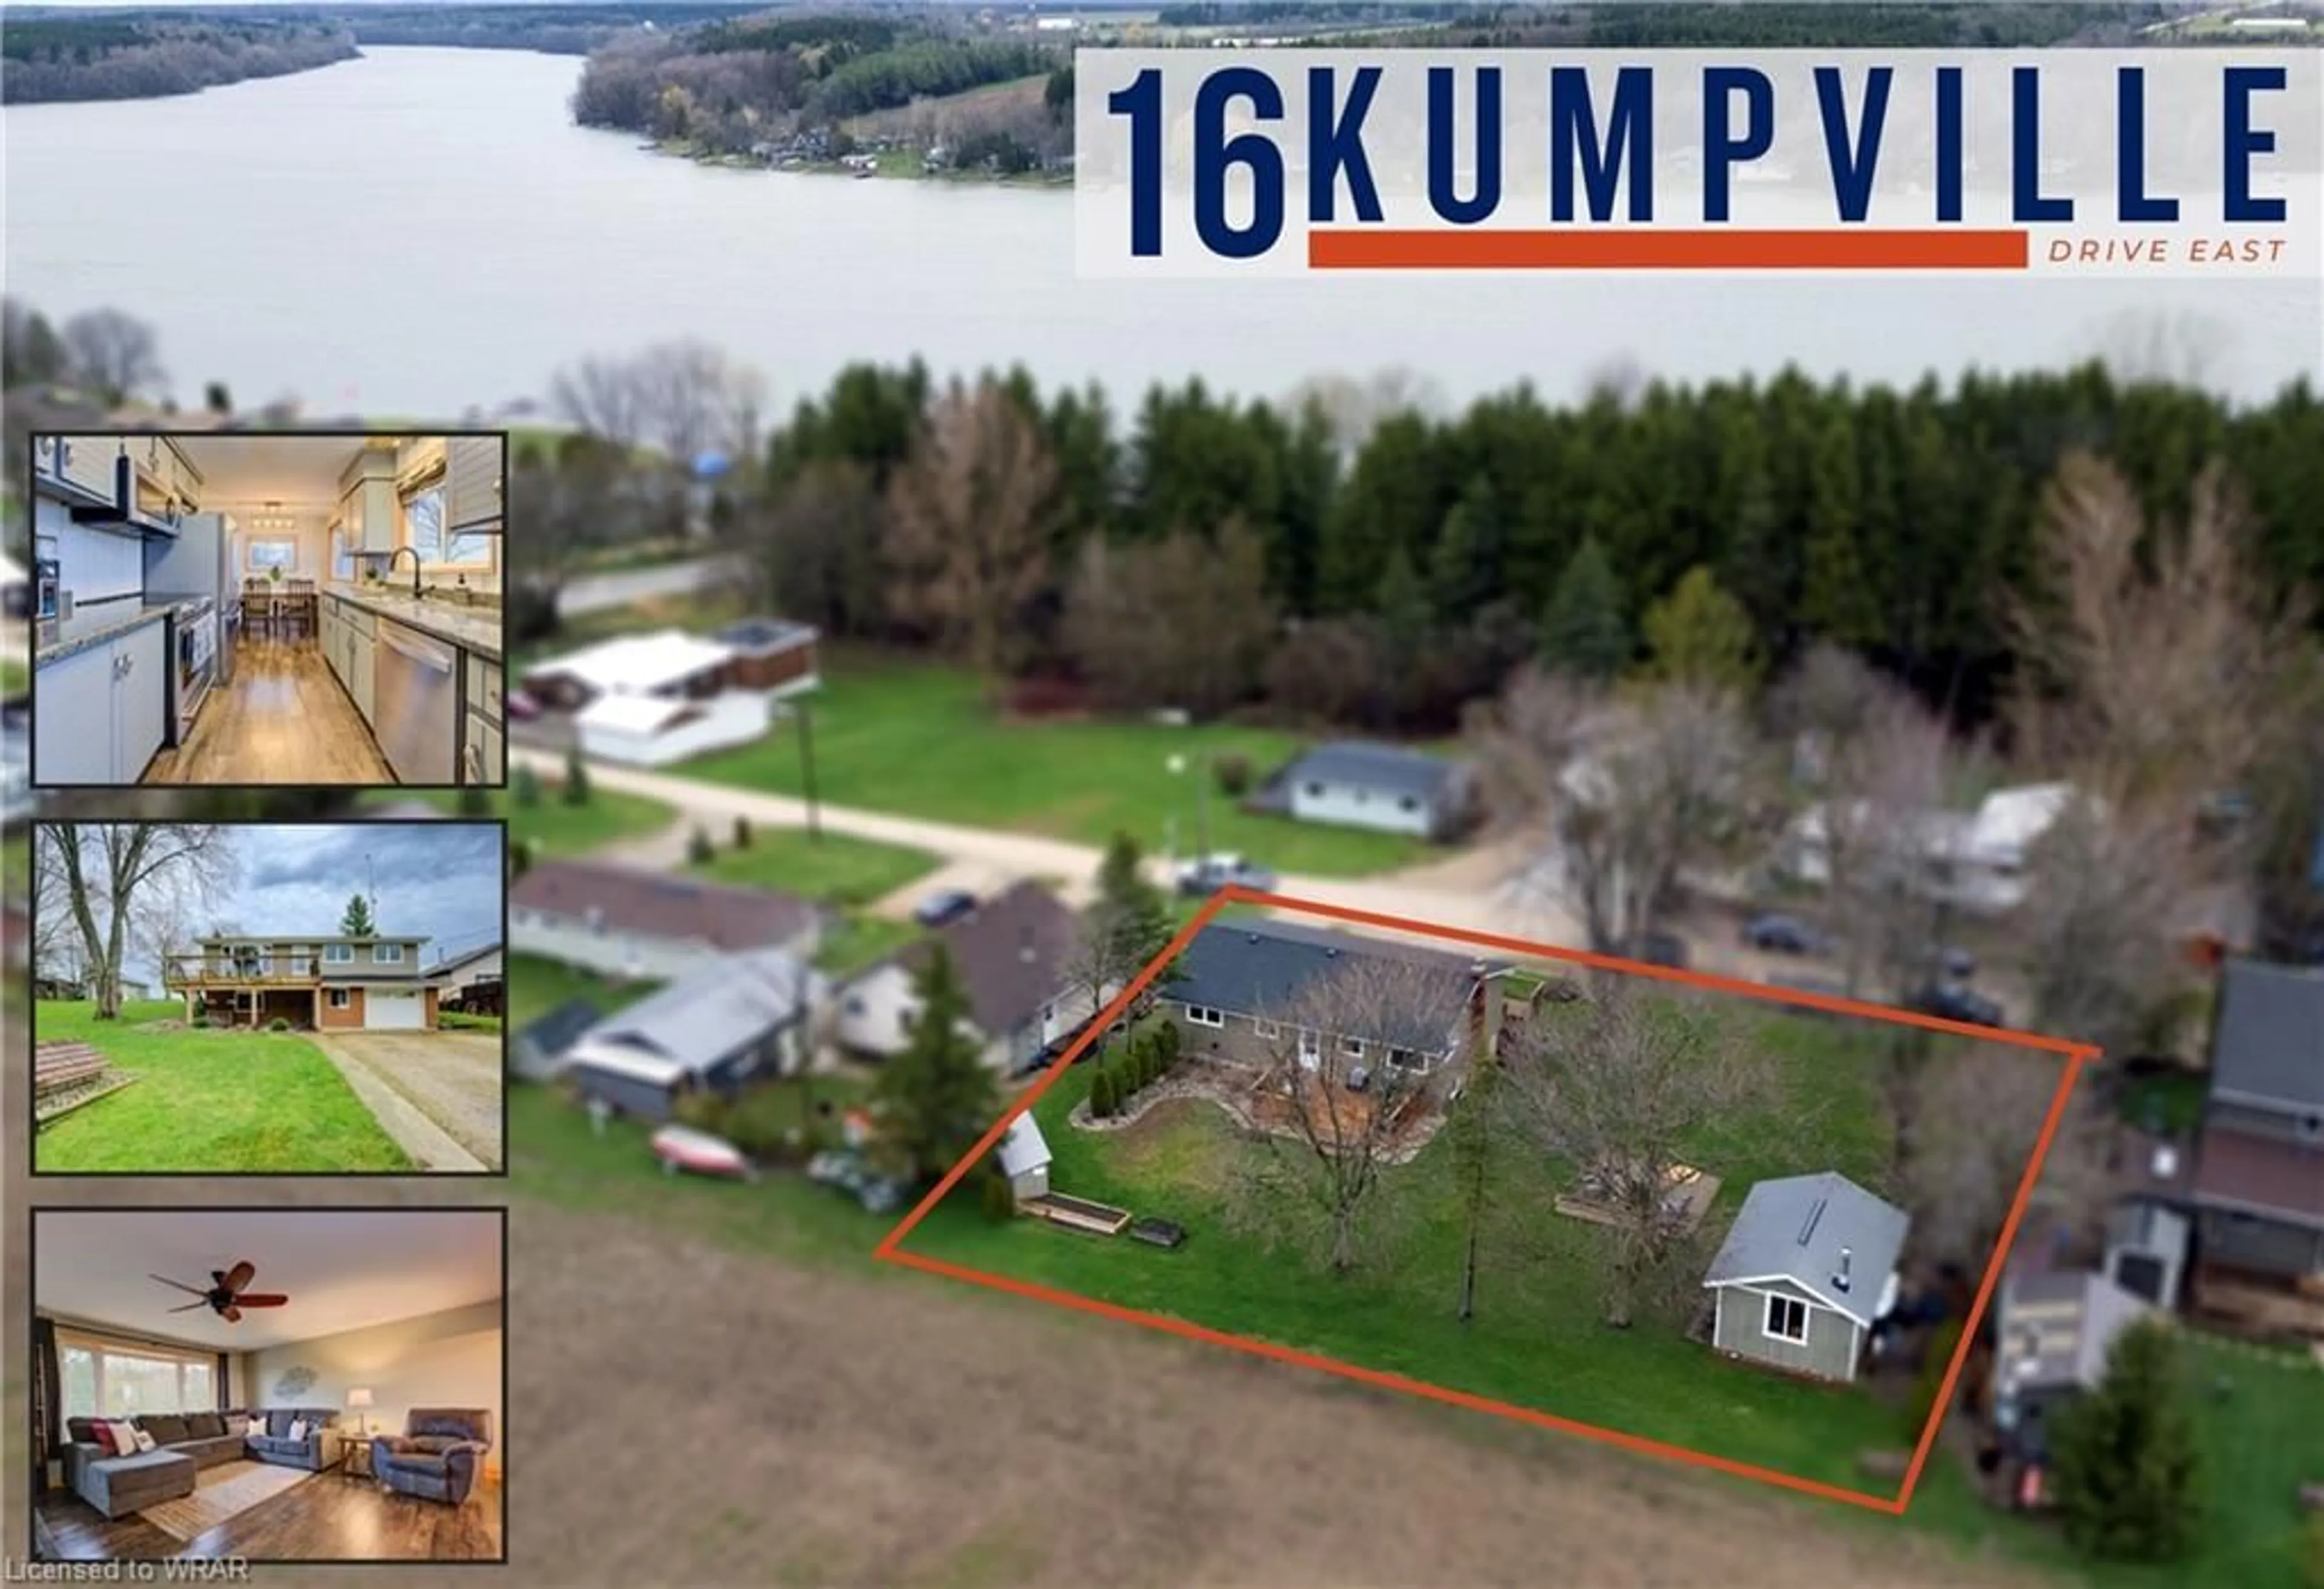 Lakeview for 16 Kumpville Dr. E., Rr3, Listowel, Conestogo Lake Ontario N4W 3G8